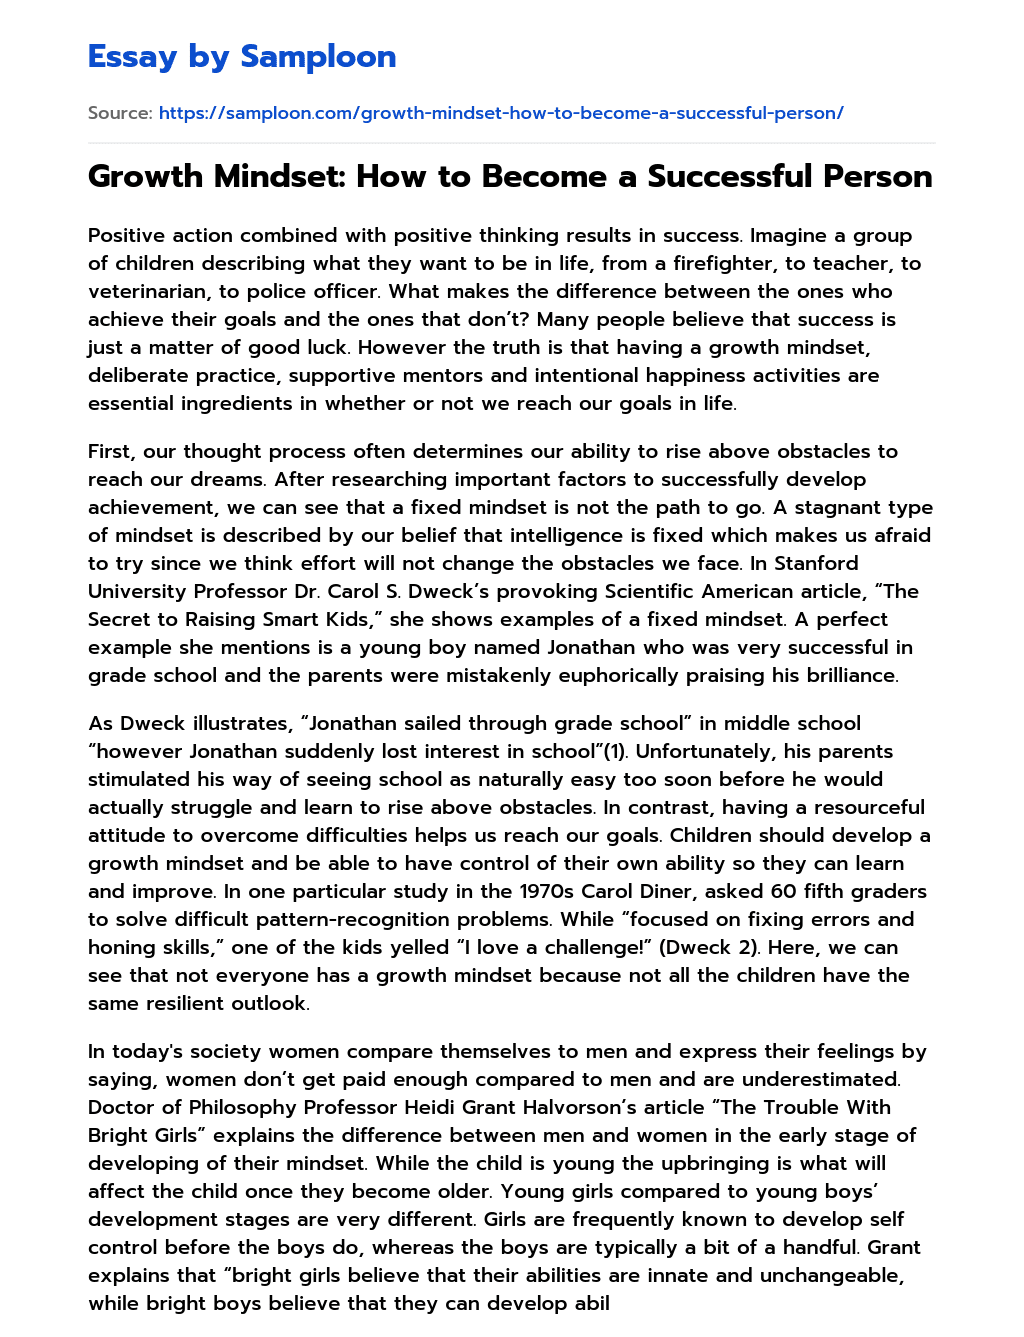 Growth Mindset: How to Become a Successful Person essay